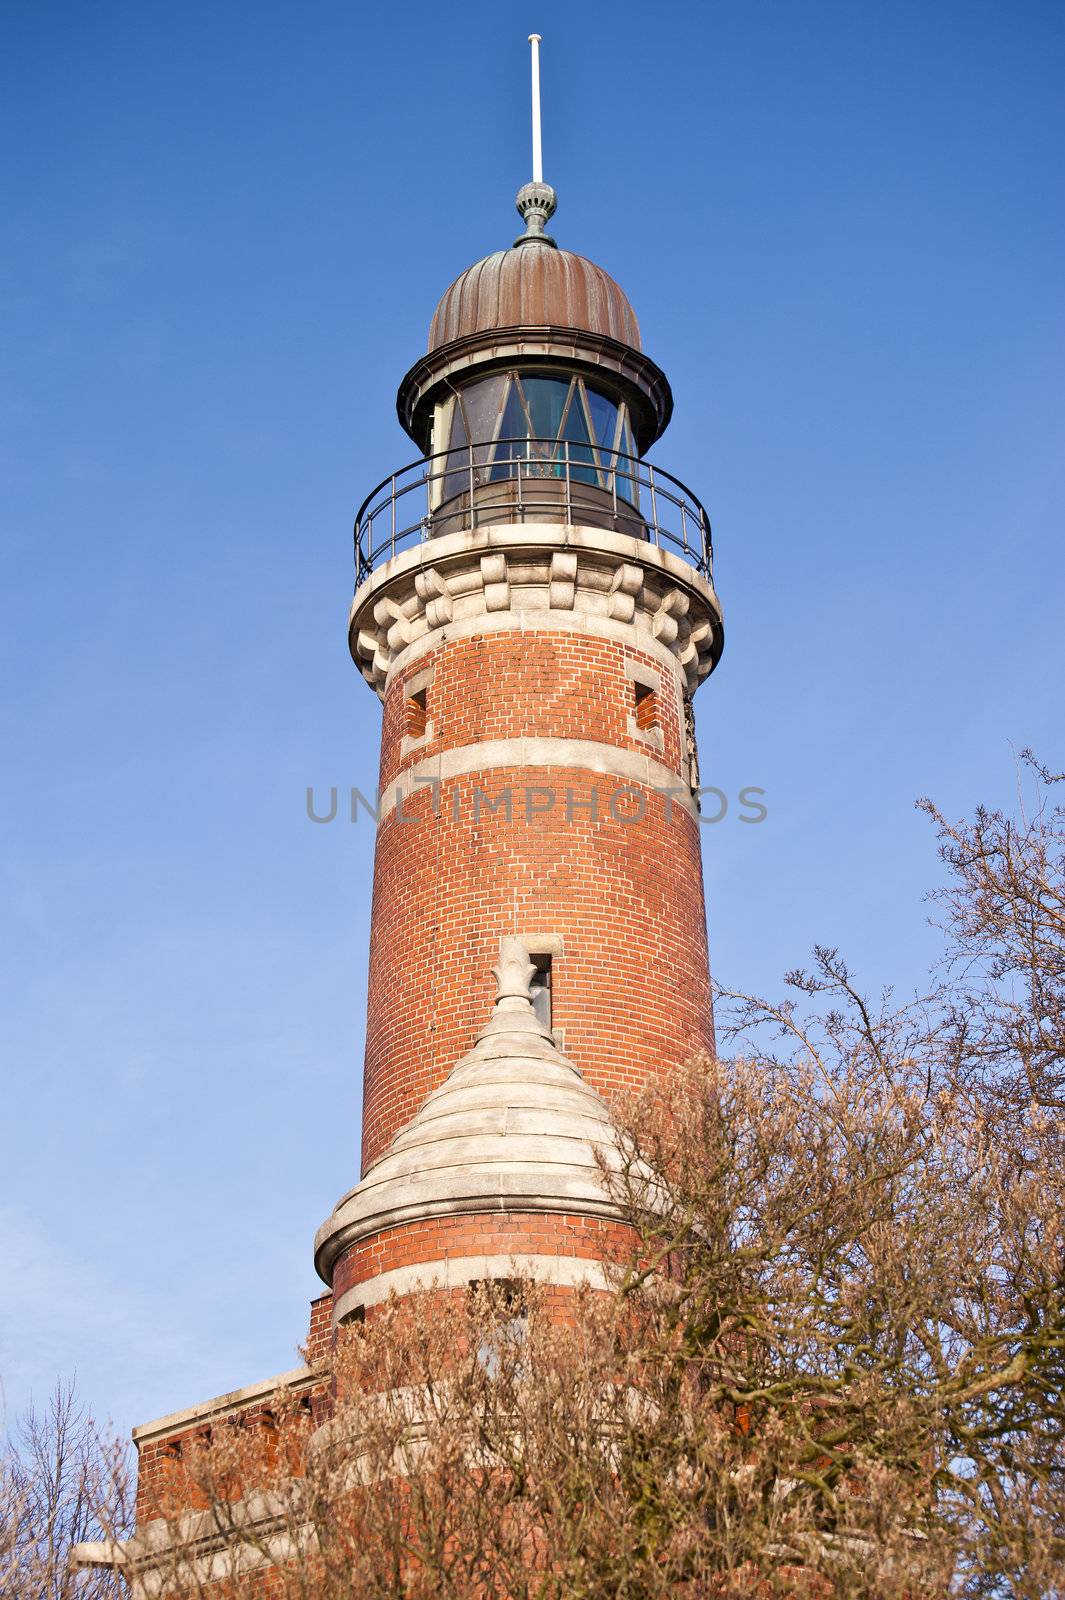 Lighthouse in Holtenau, Germany